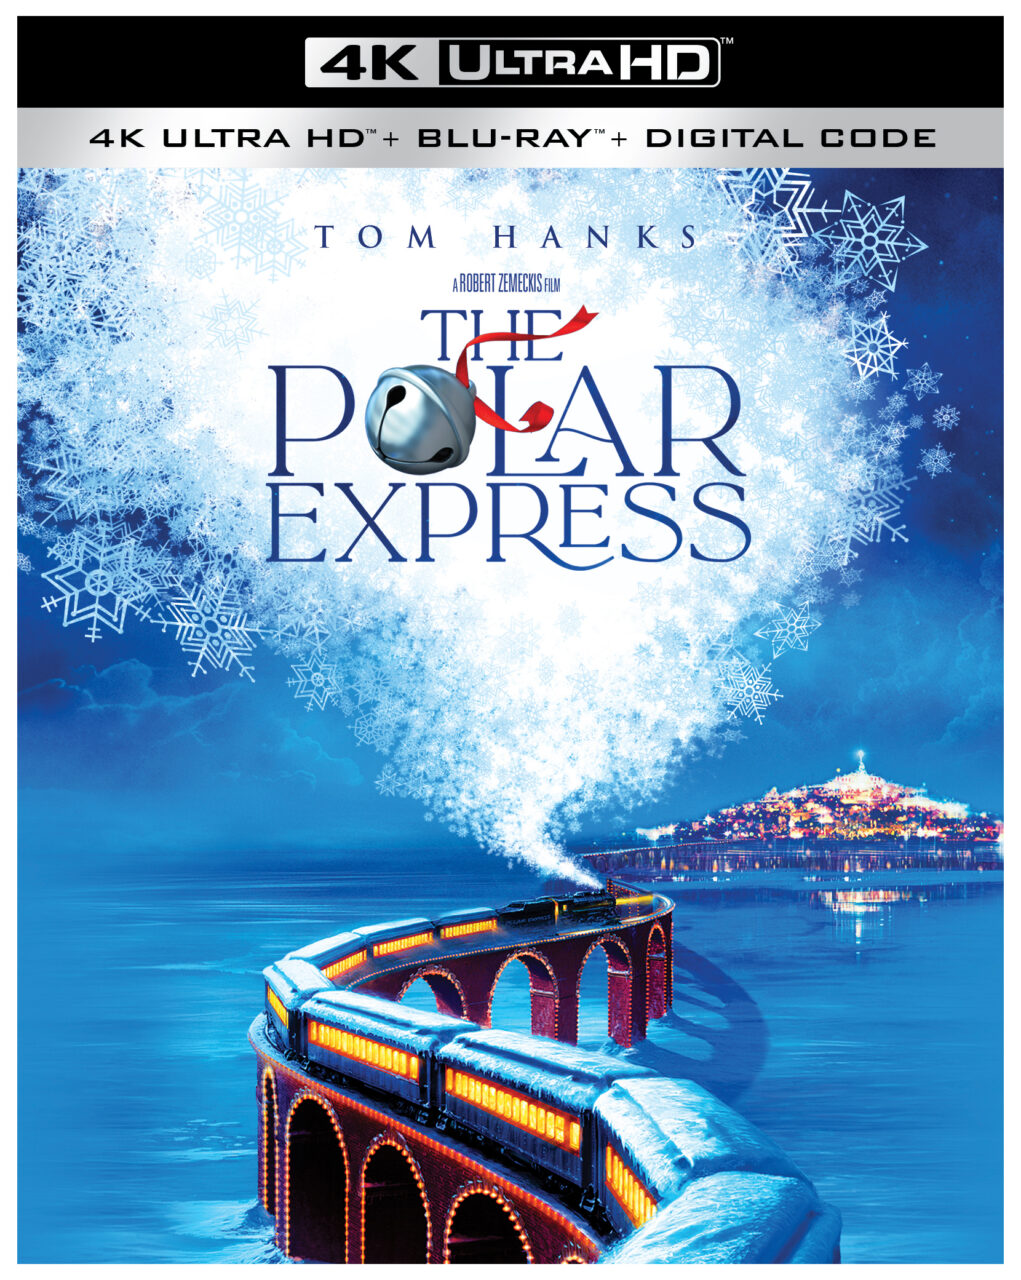 The Polar Express 4K Ultra HD Combo Pack cover (Warner Bros. Home Entertainment)